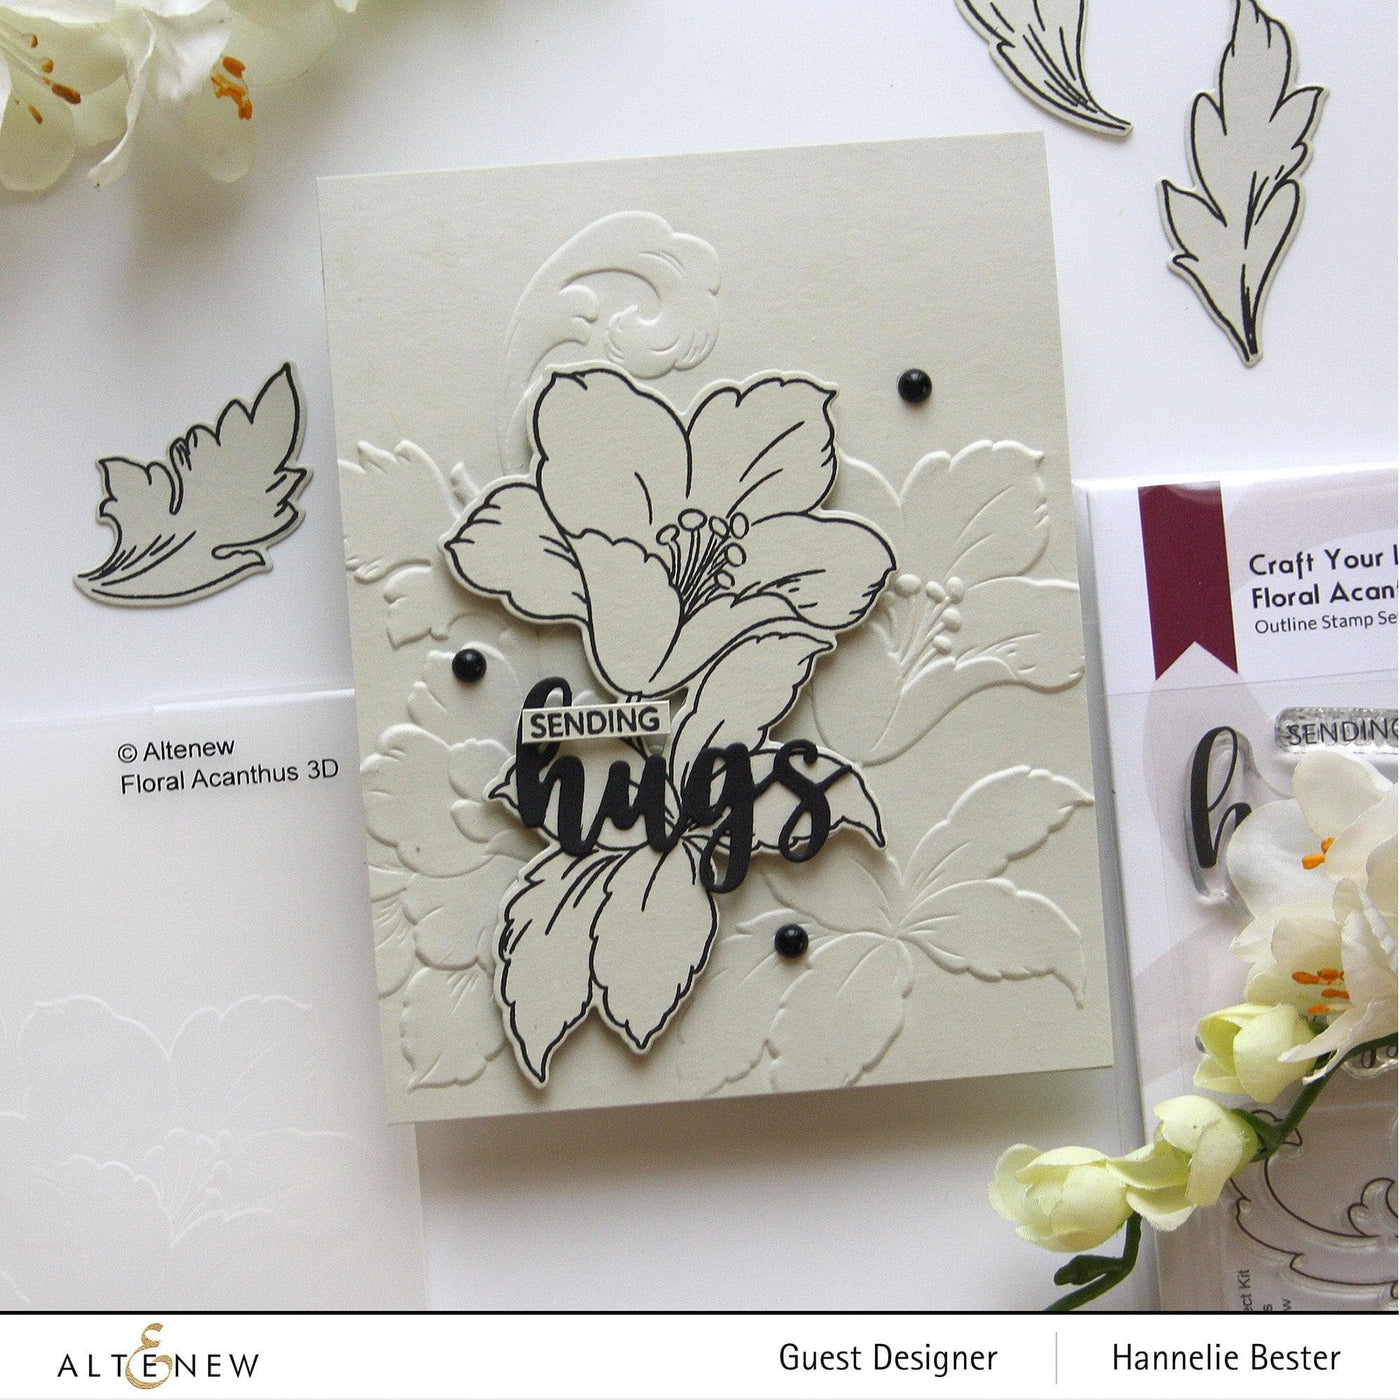 Jo-AnnE's Stencils & Stamps – Stencils for crafting and wall art. Business  stamps. Laser cutting and engraving.